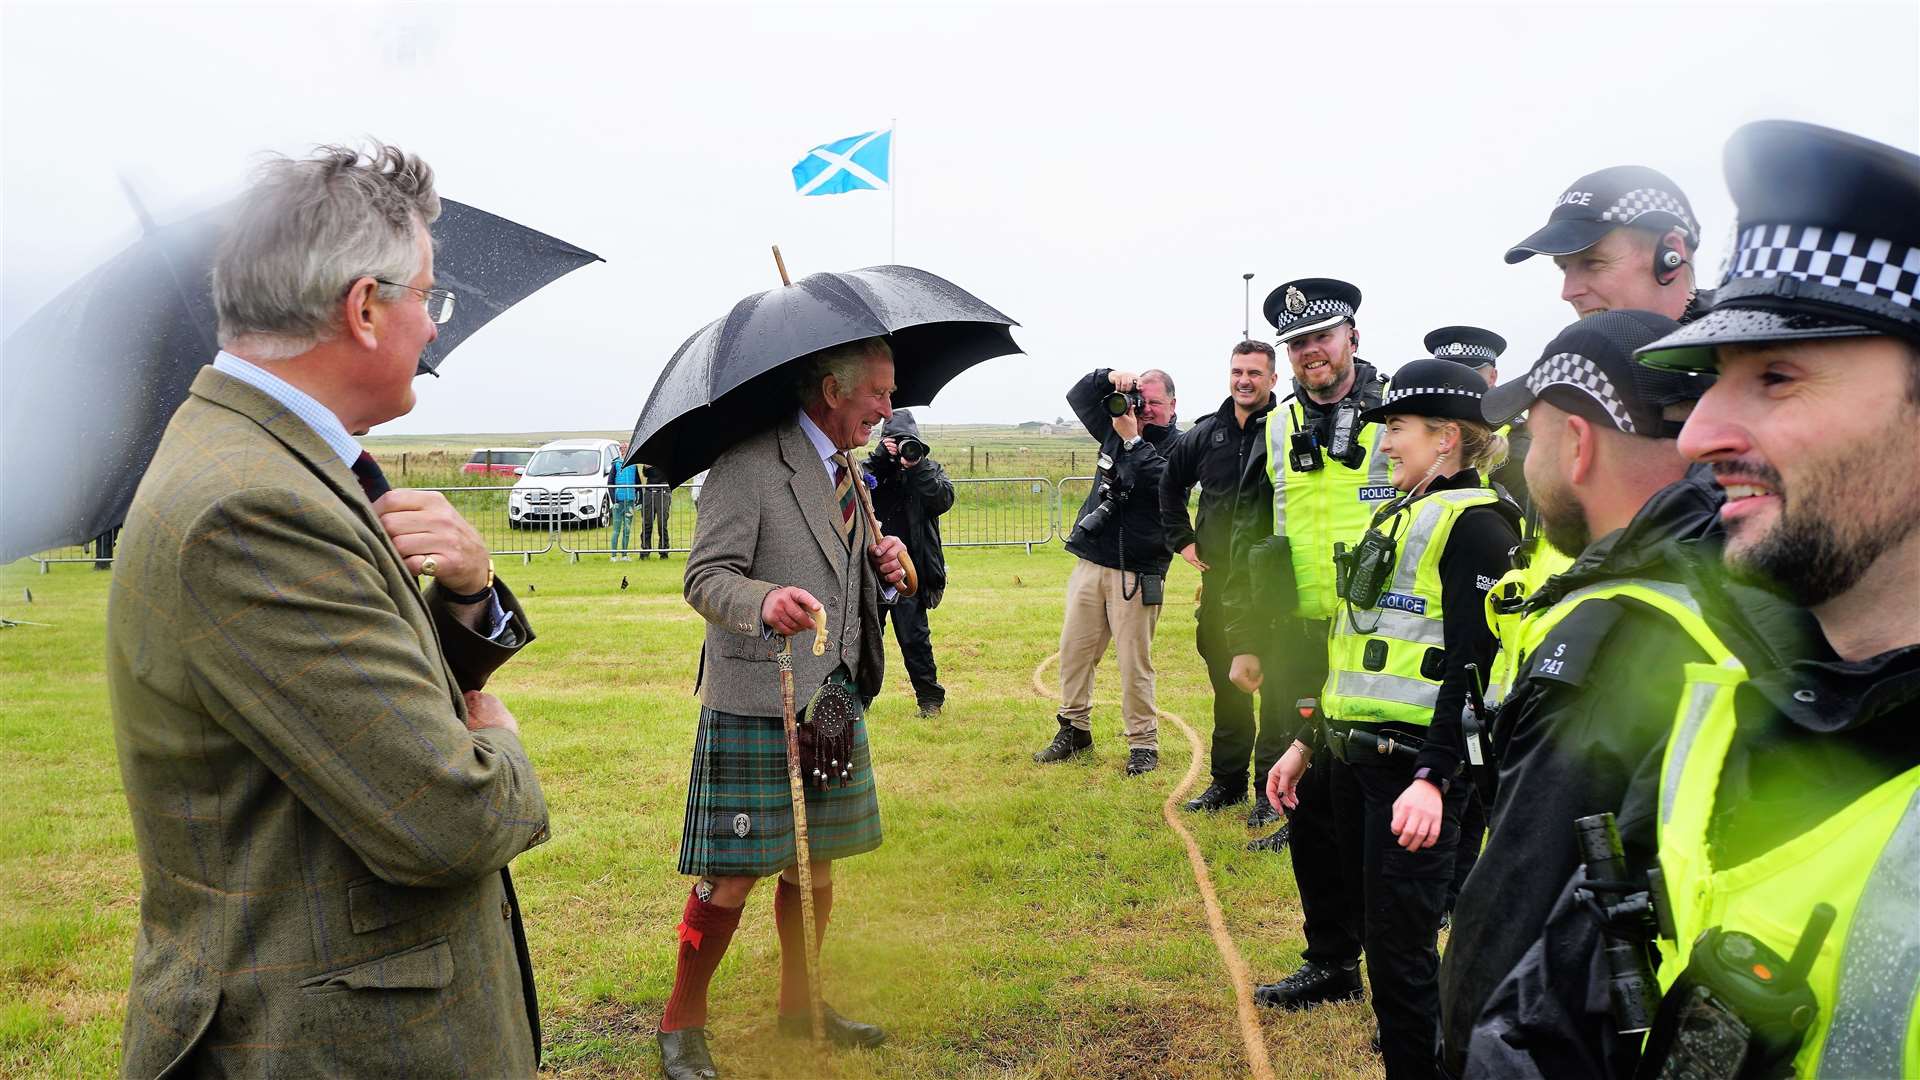 Royal aide Ashe Windham (left), pictured with Prince Charles at the Mey Highland Games says we are 'wonderfully fortunate to have his annual visits to the far north'. Picture: DGS